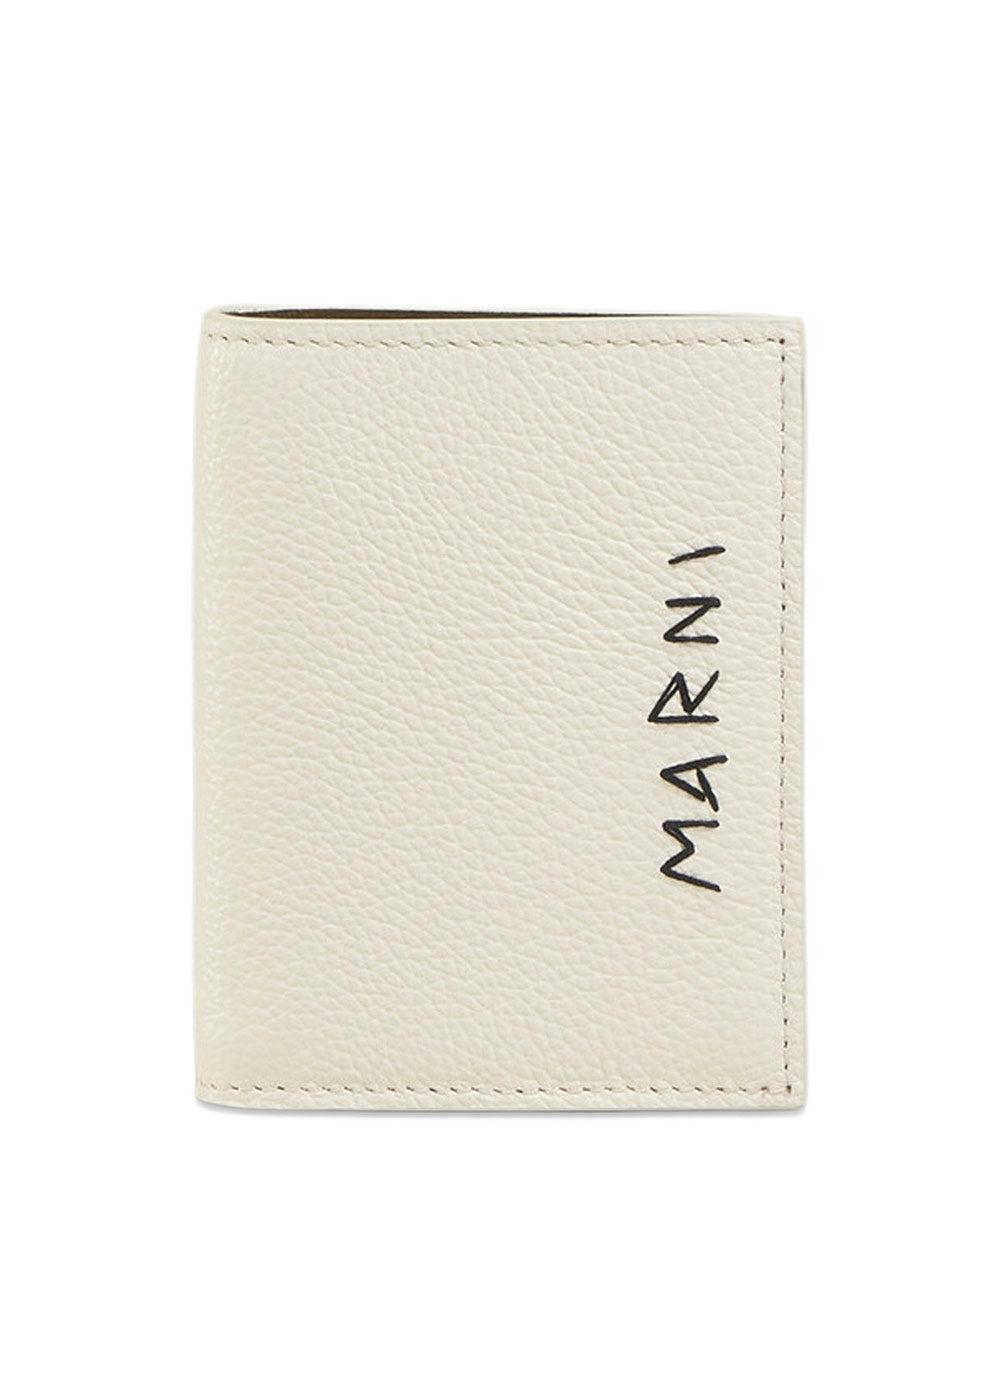 LEATHER BIFOLD WALLET WITH MARNI MENDING - White/Brown